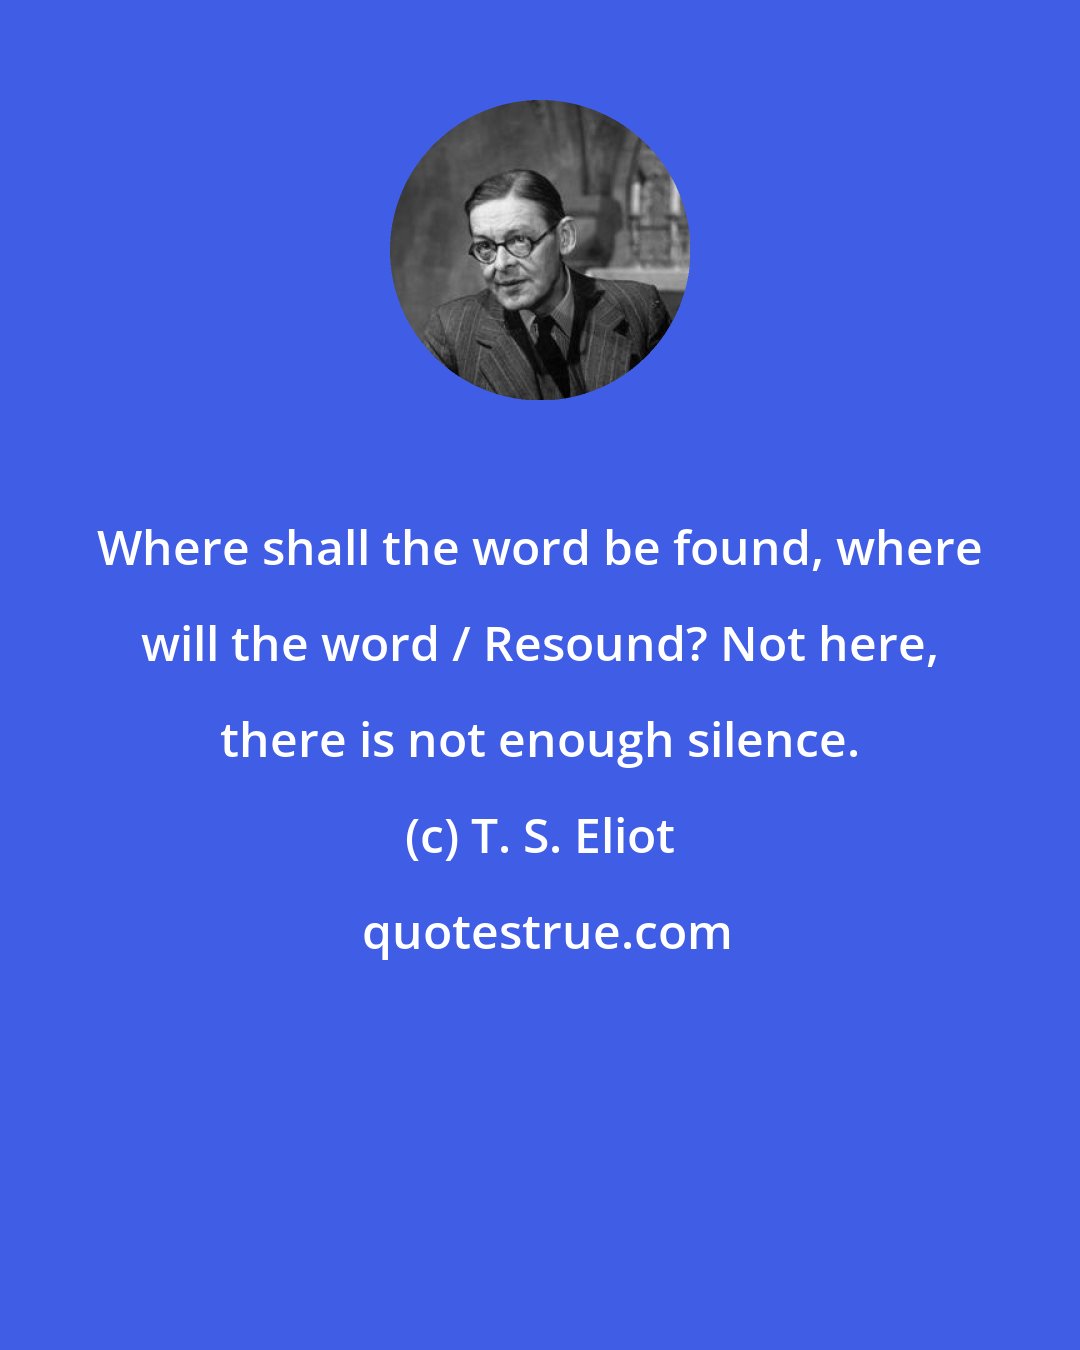 T. S. Eliot: Where shall the word be found, where will the word / Resound? Not here, there is not enough silence.